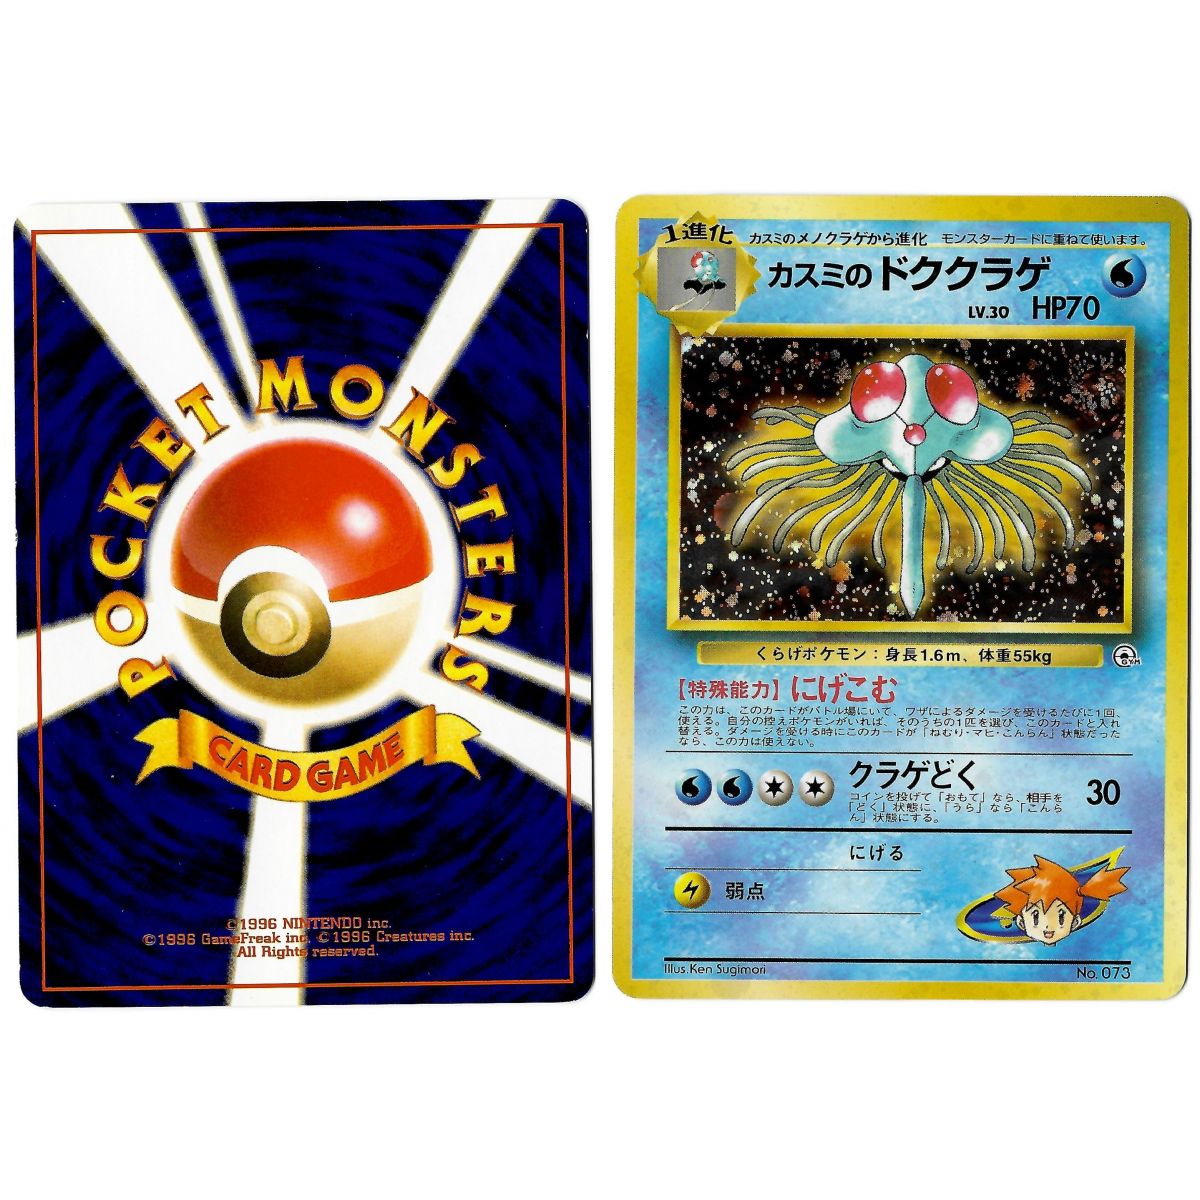 Misty's Tentacruel (4) No.073 Leaders' Stadium G1 Holo Unlimited Japanese View Scan